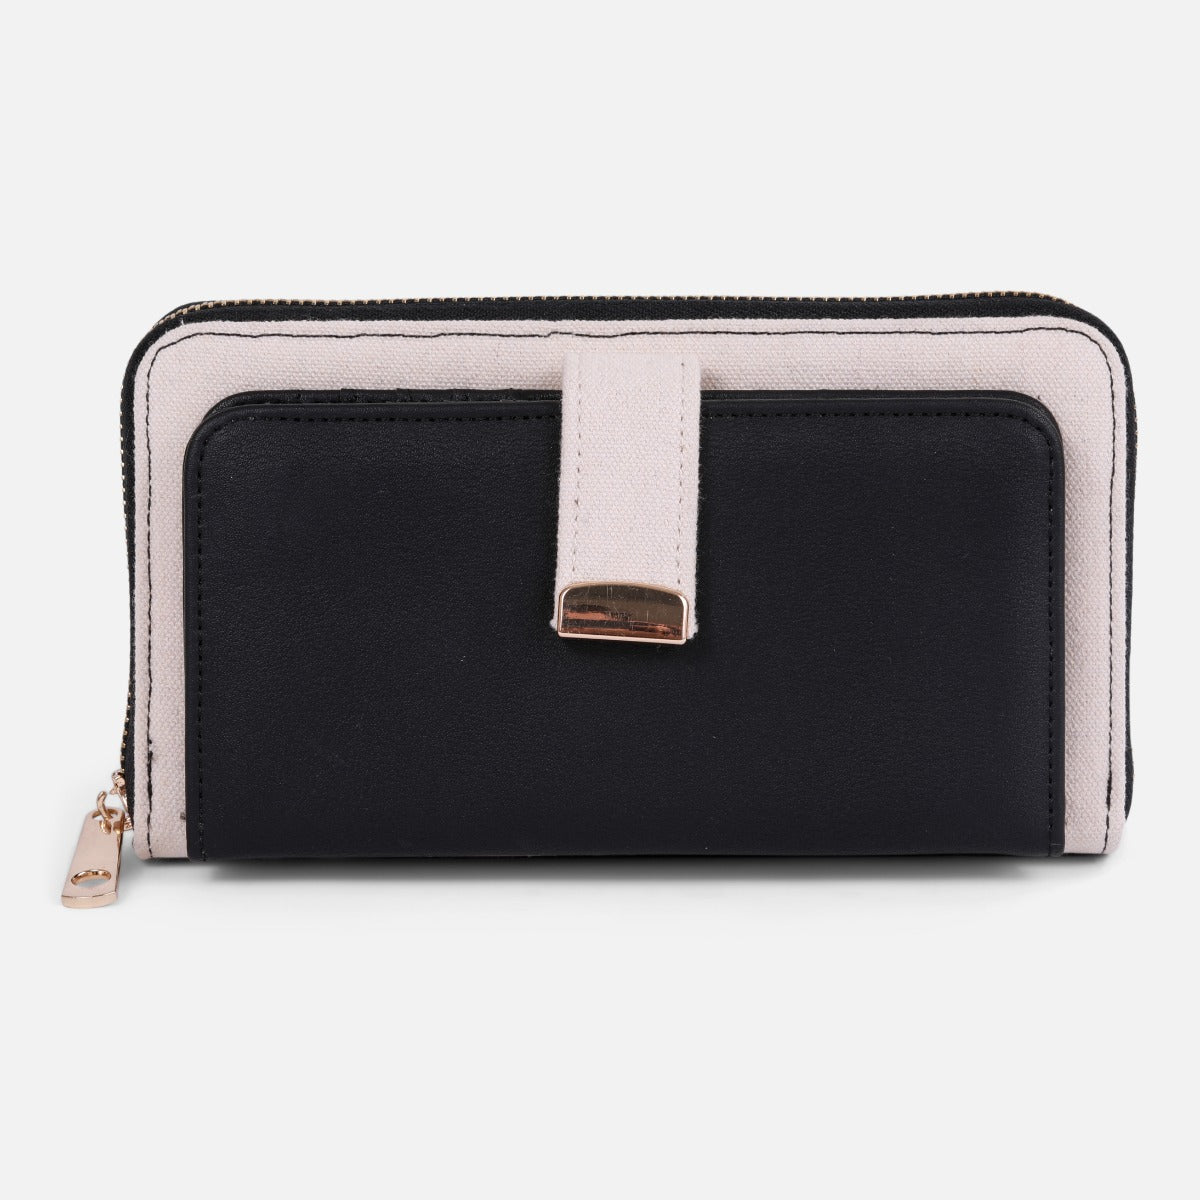 Beige and black wallet with front pocket